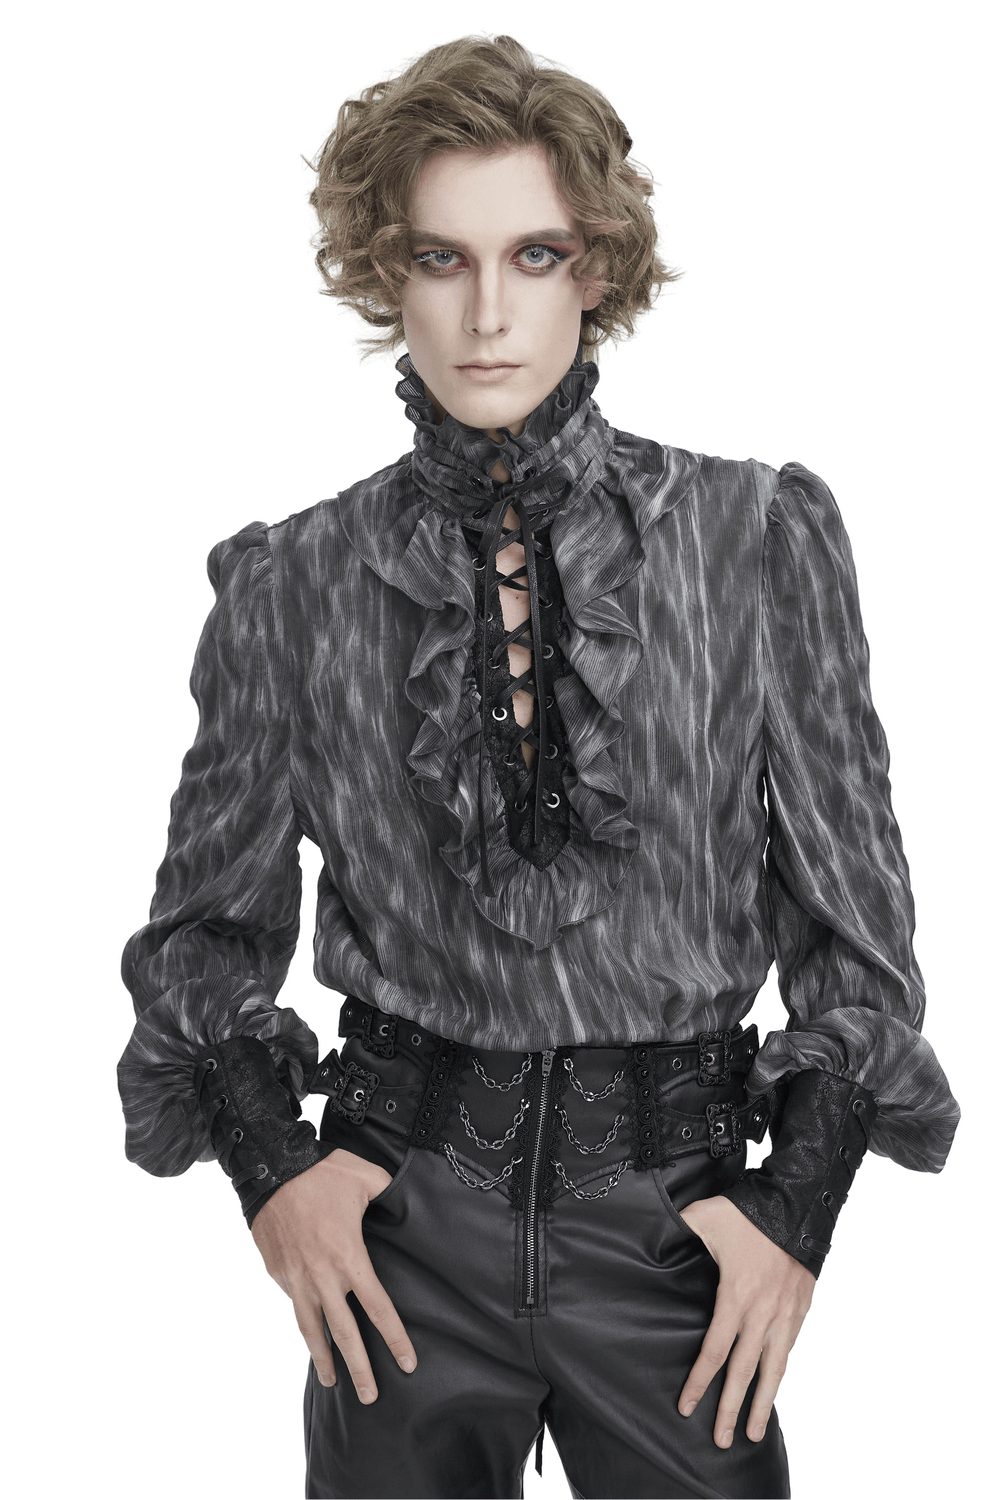 Vintage-Inspired Lace-Up Ruffle Gothic Shirt for Men